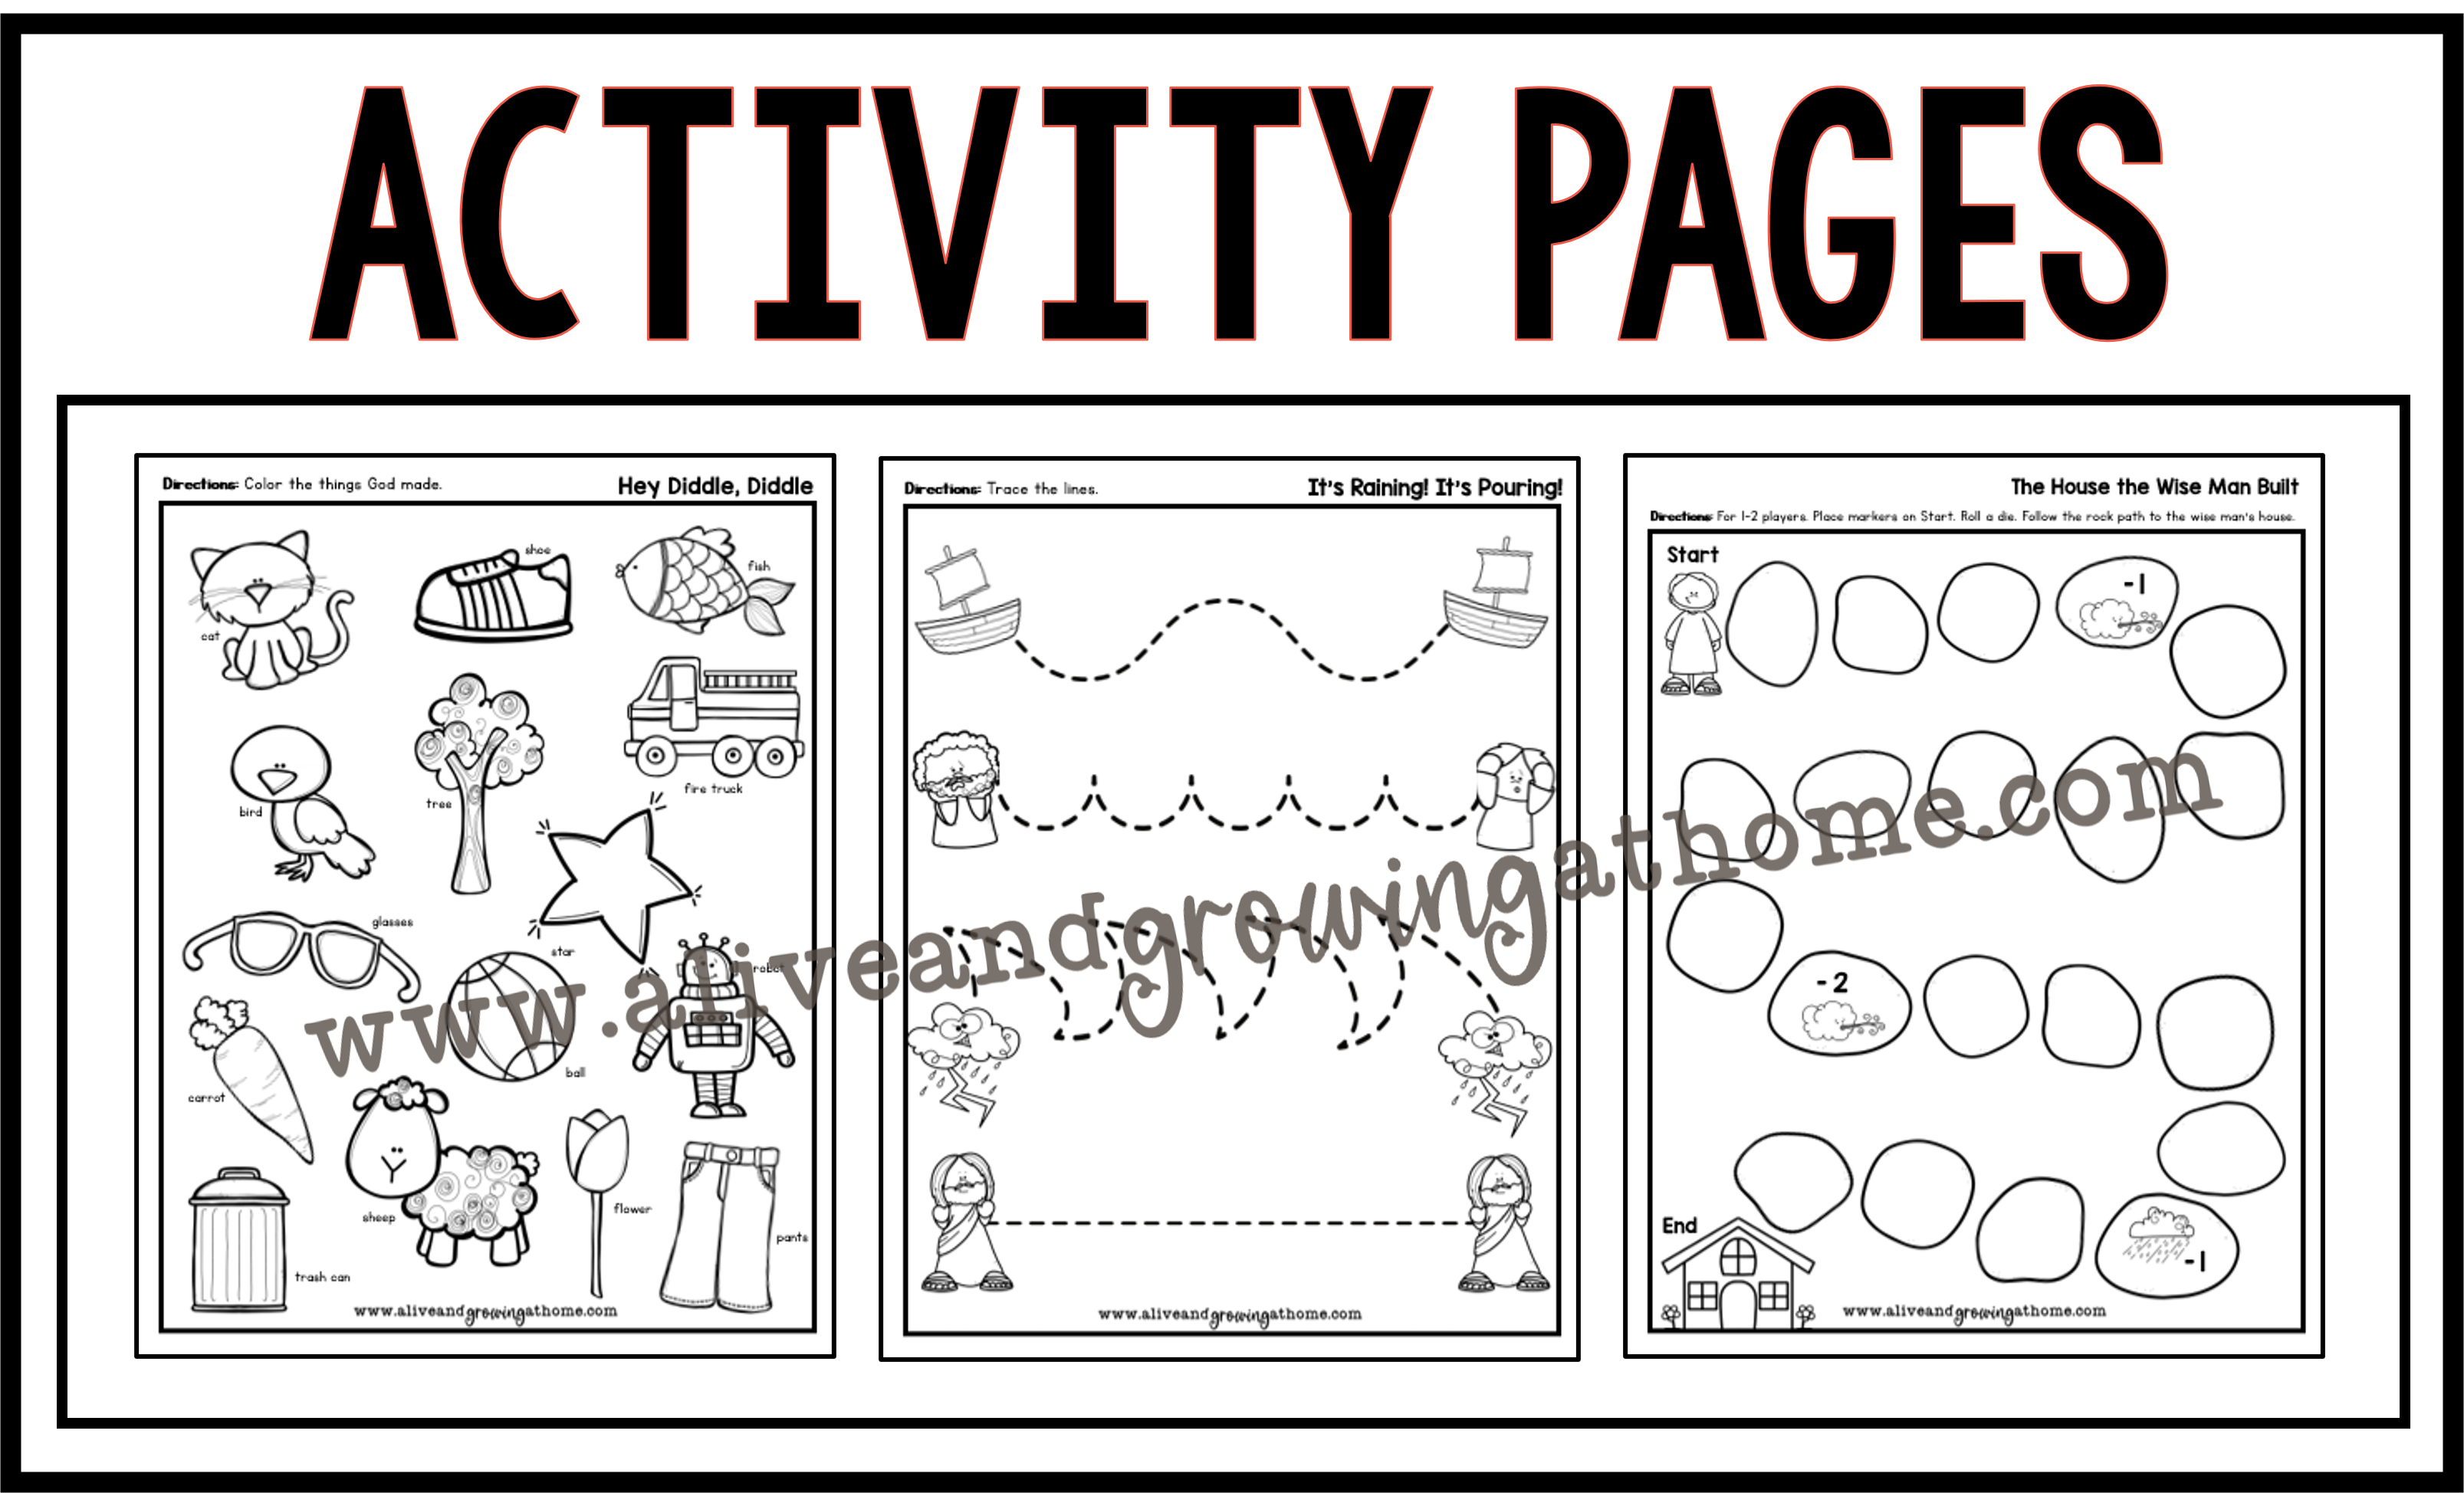 Activity Pages - Christian Nursery Rhymes